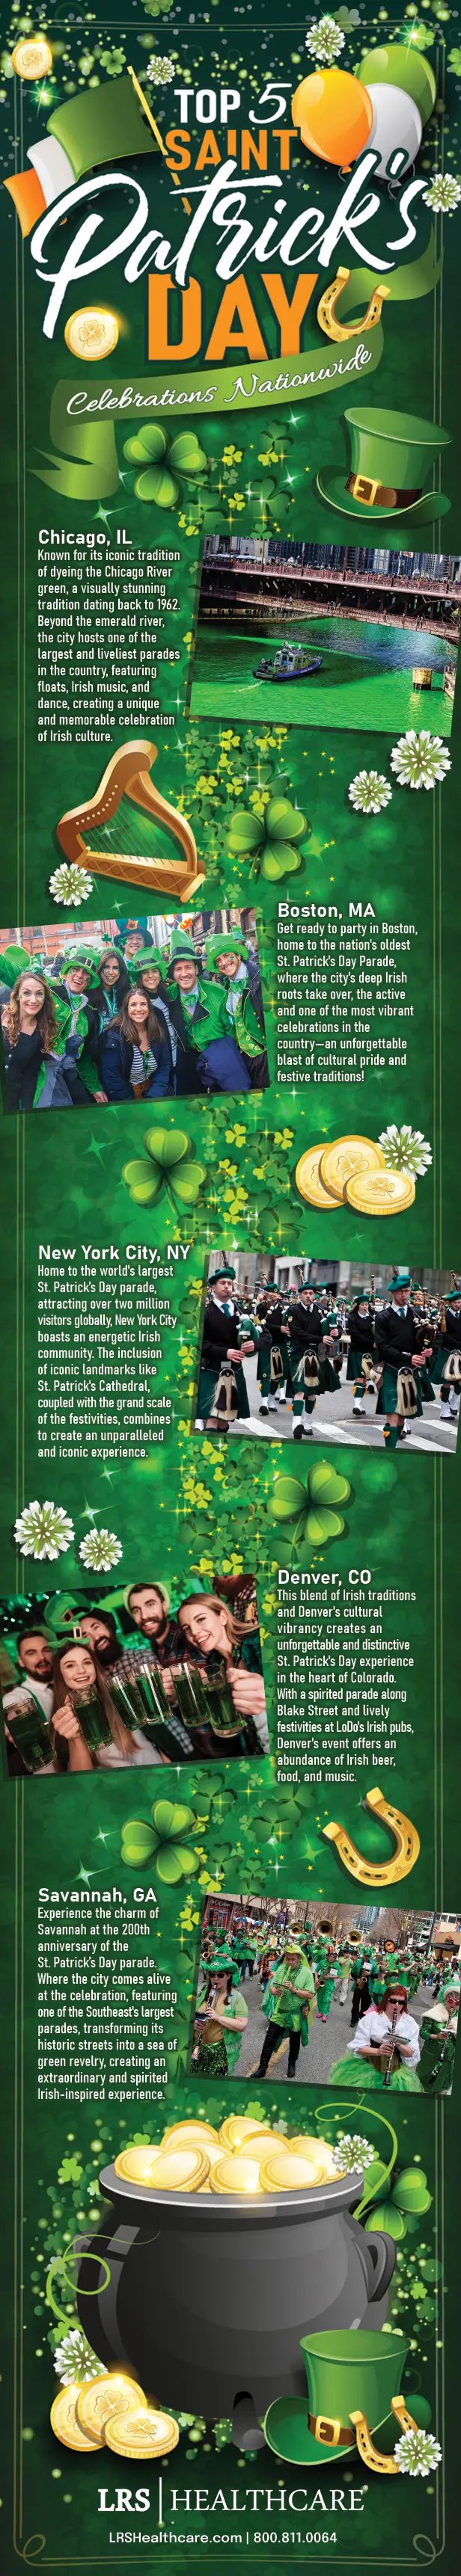 Infographic about the top 5 locations for St. Patrick's Day celebrations in the nation